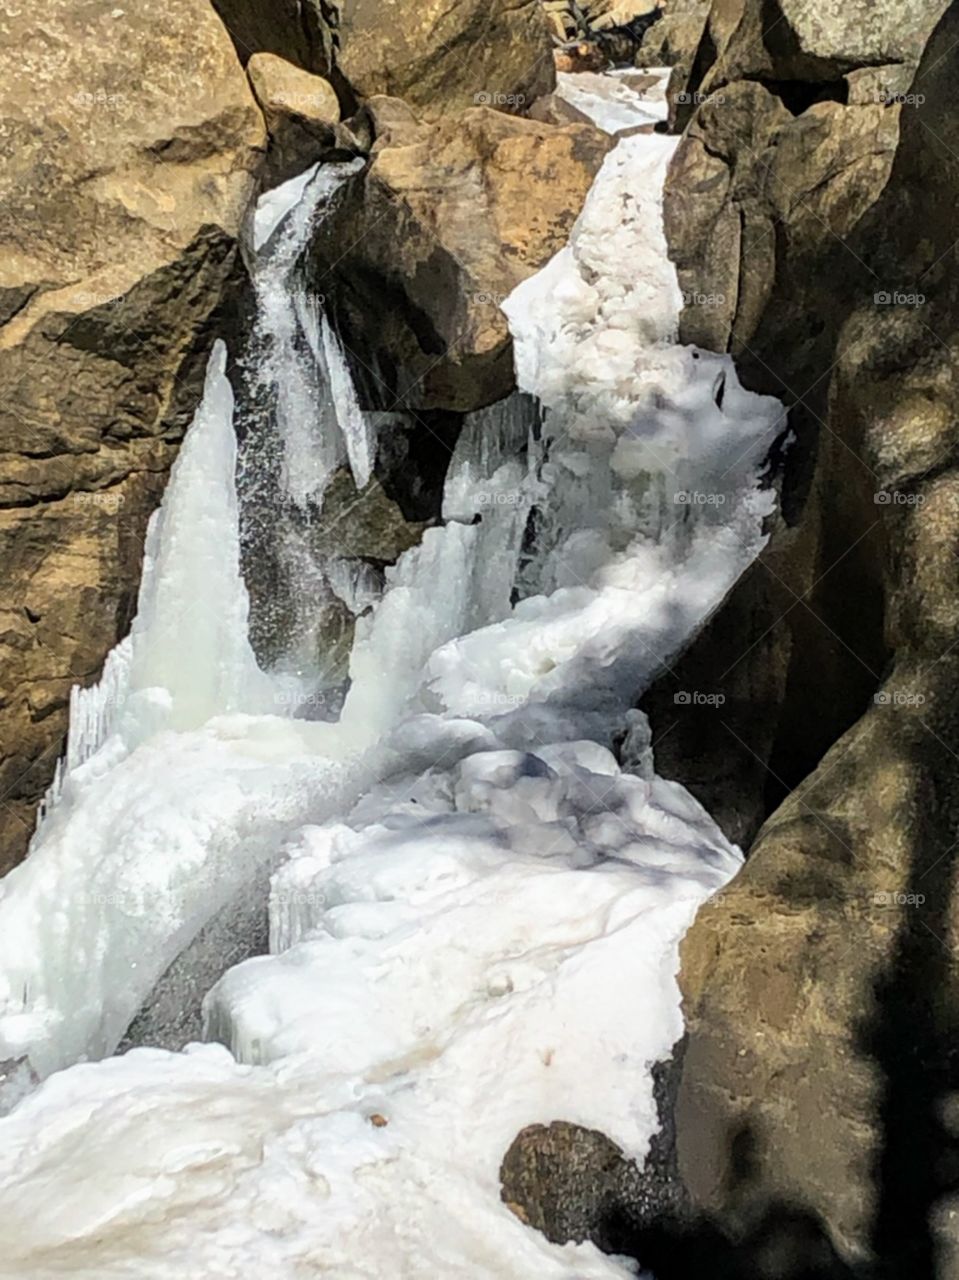 Partly frozen waterfall at Boulder Falls just west of Boulder, Co.